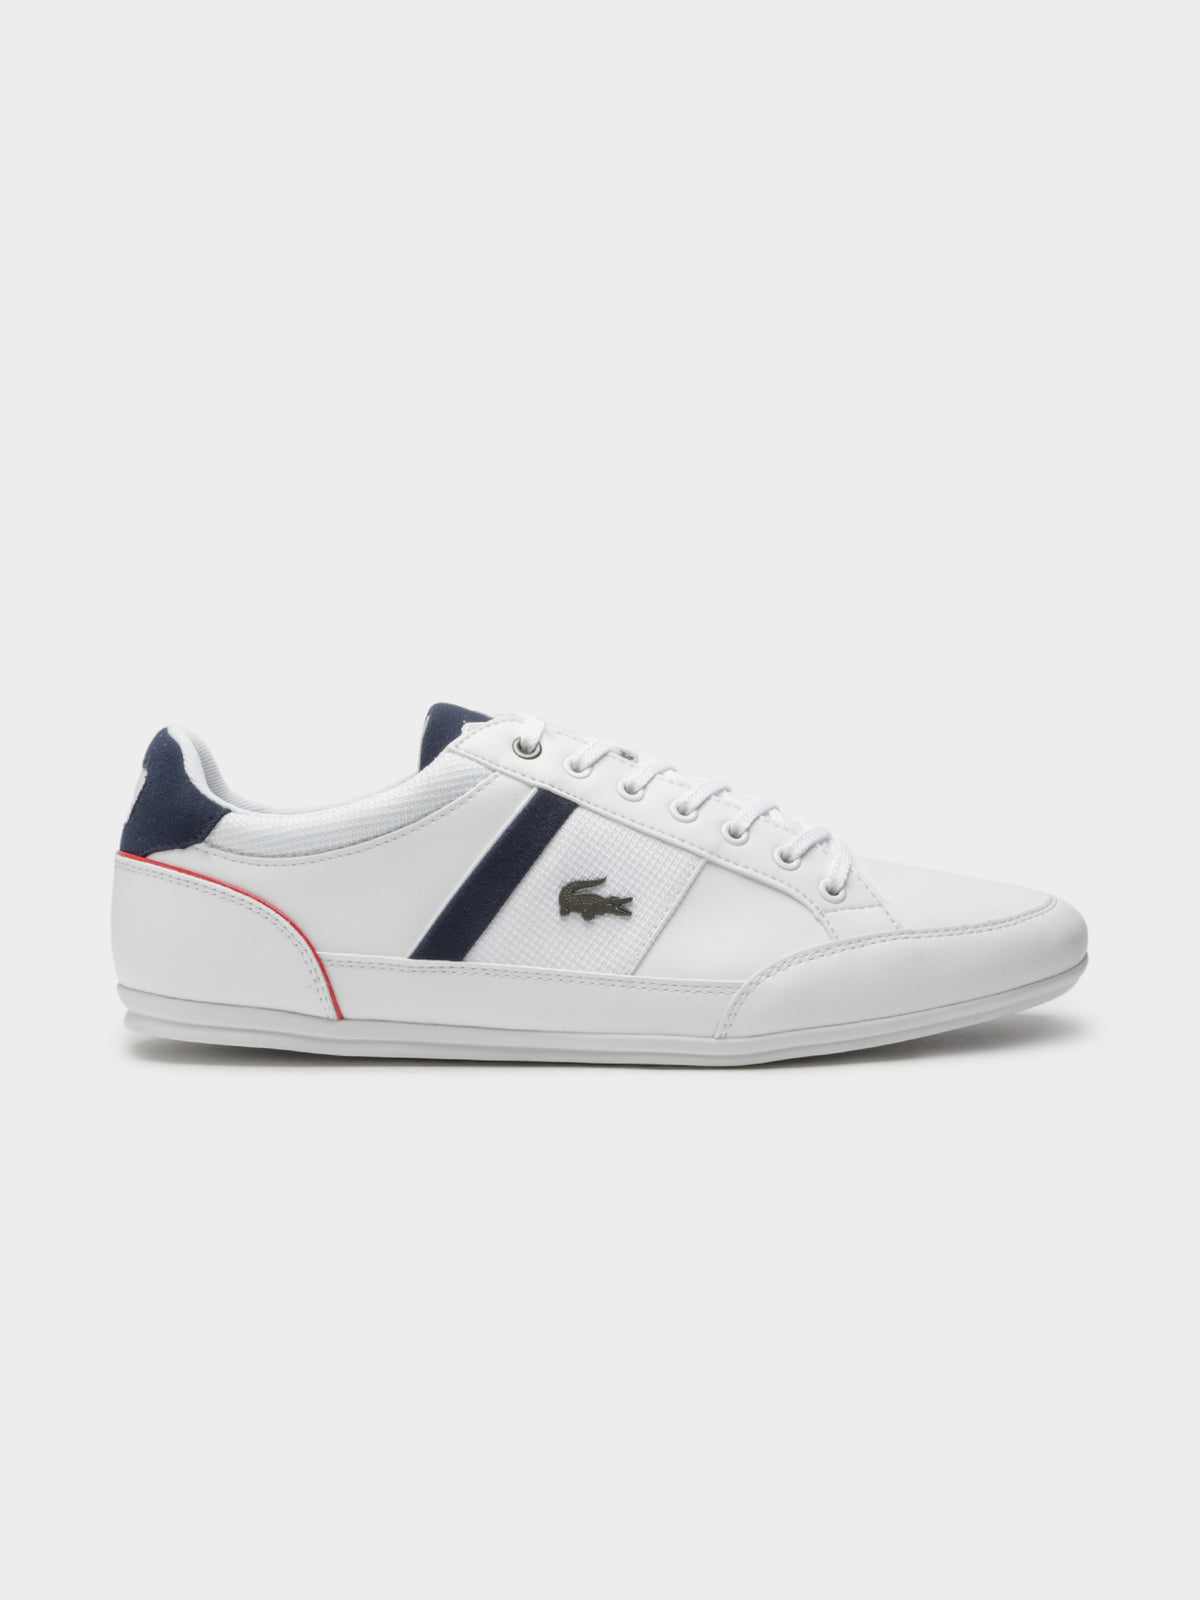 Mens Chaymon 318 Sneakers in White and Navy